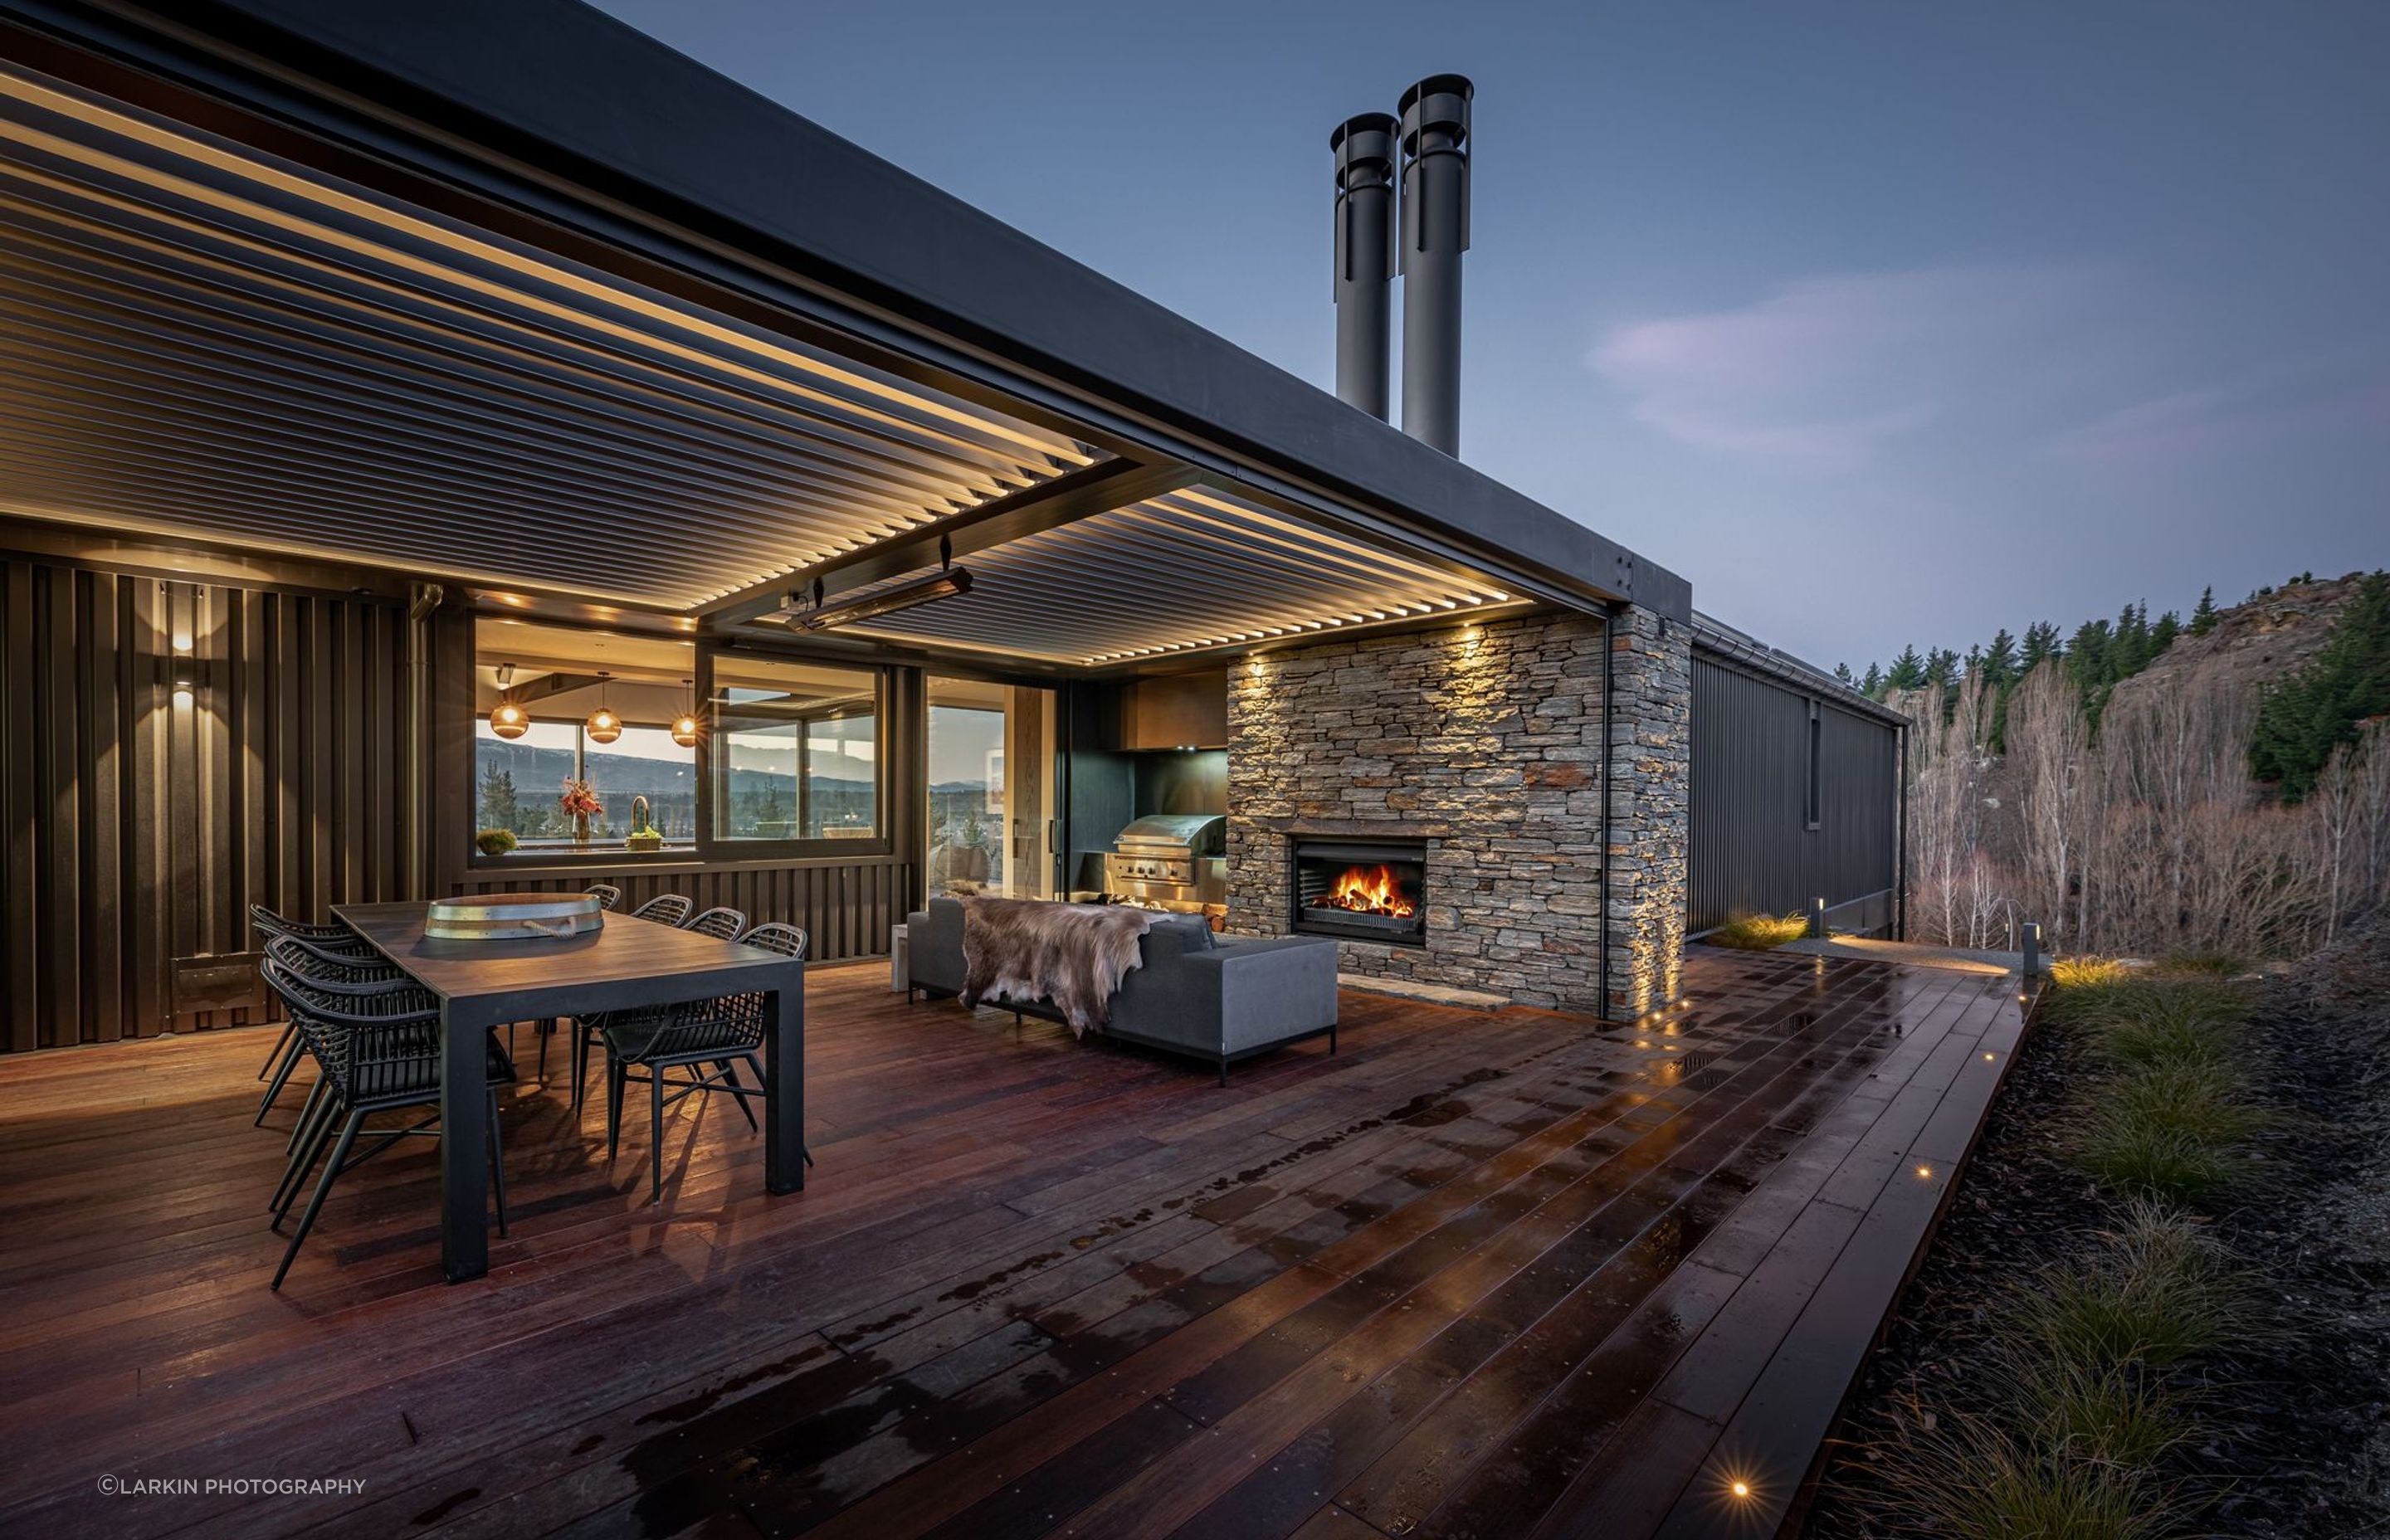 At the rear of the house, adjacent to the kitchen, an external courtyard with schist fireplace and operable louvred roof provide a sheltered space outdoors to enjoy year-round.